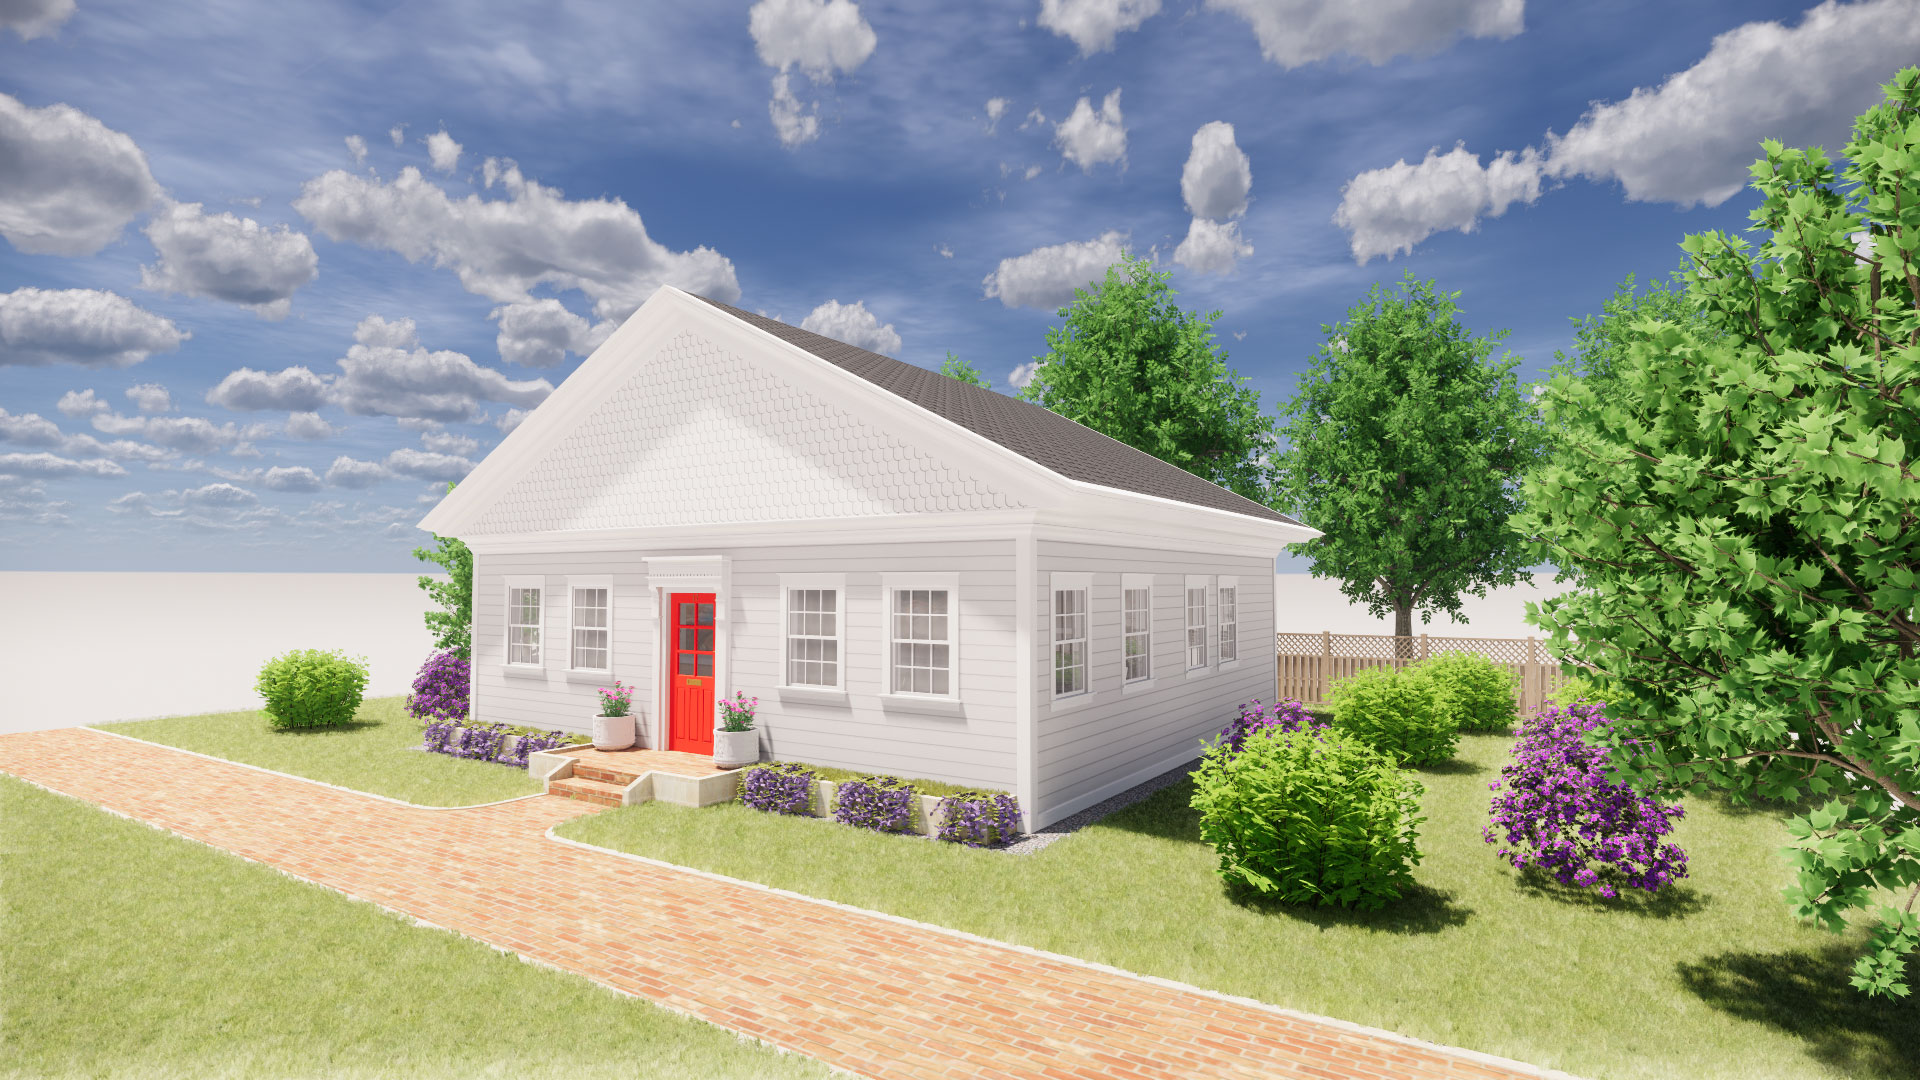 Exterior render of white colonial style houses with a red door and many windows.